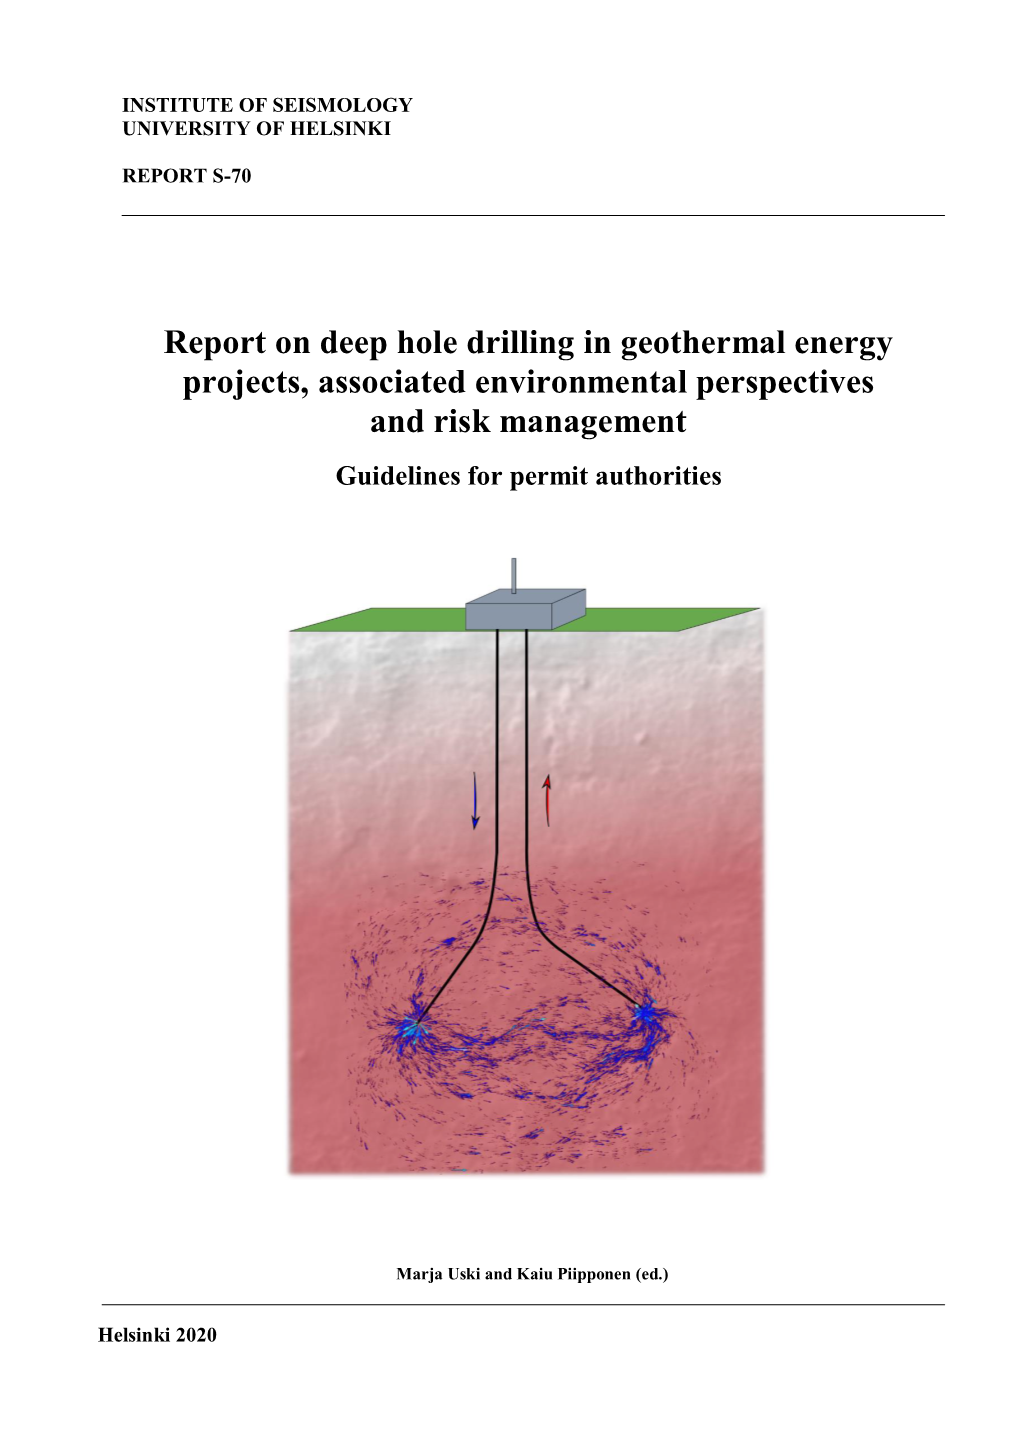 Report on Deep Hole Drilling in Geothermal Energy Projects, Associated Environmental Perspectives and Risk Management